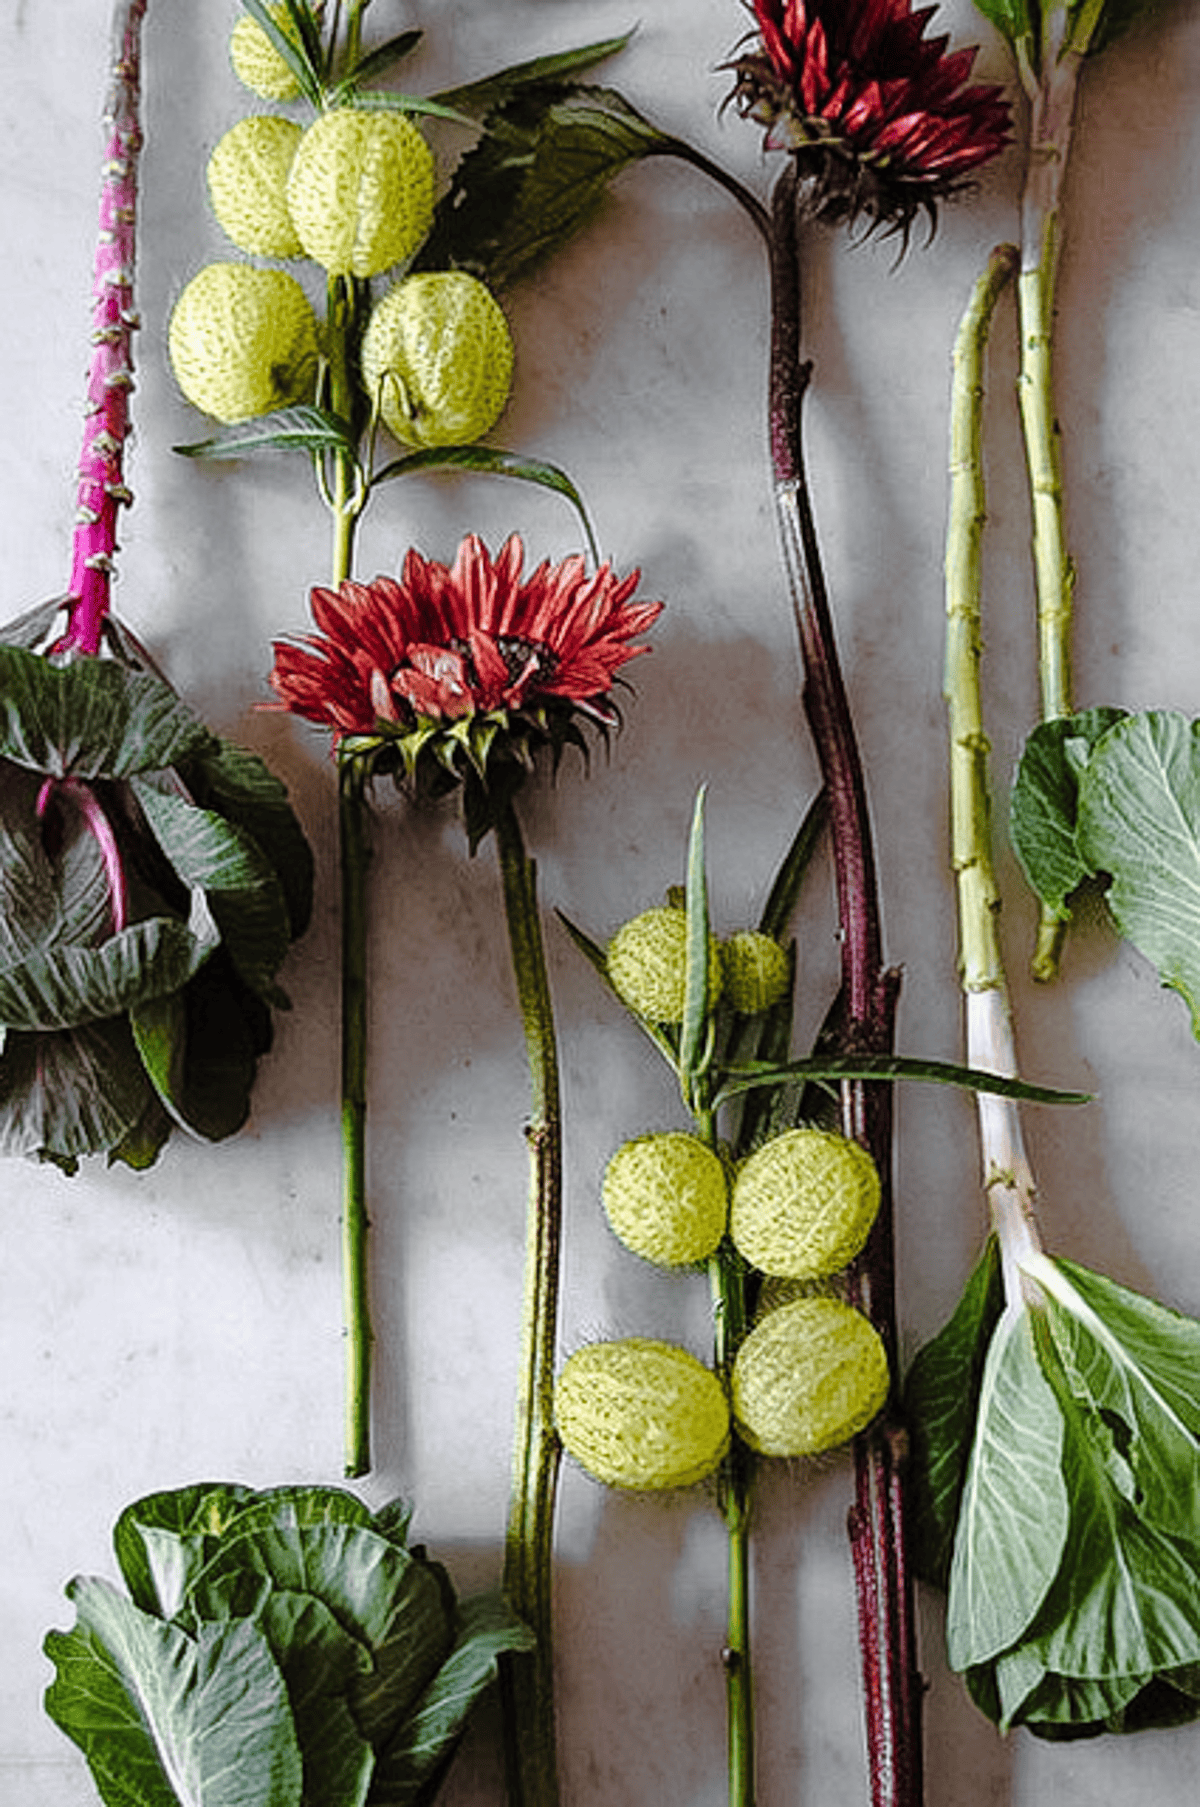 Stems of flowers including green hairy balls, sunflowers and cabbage.